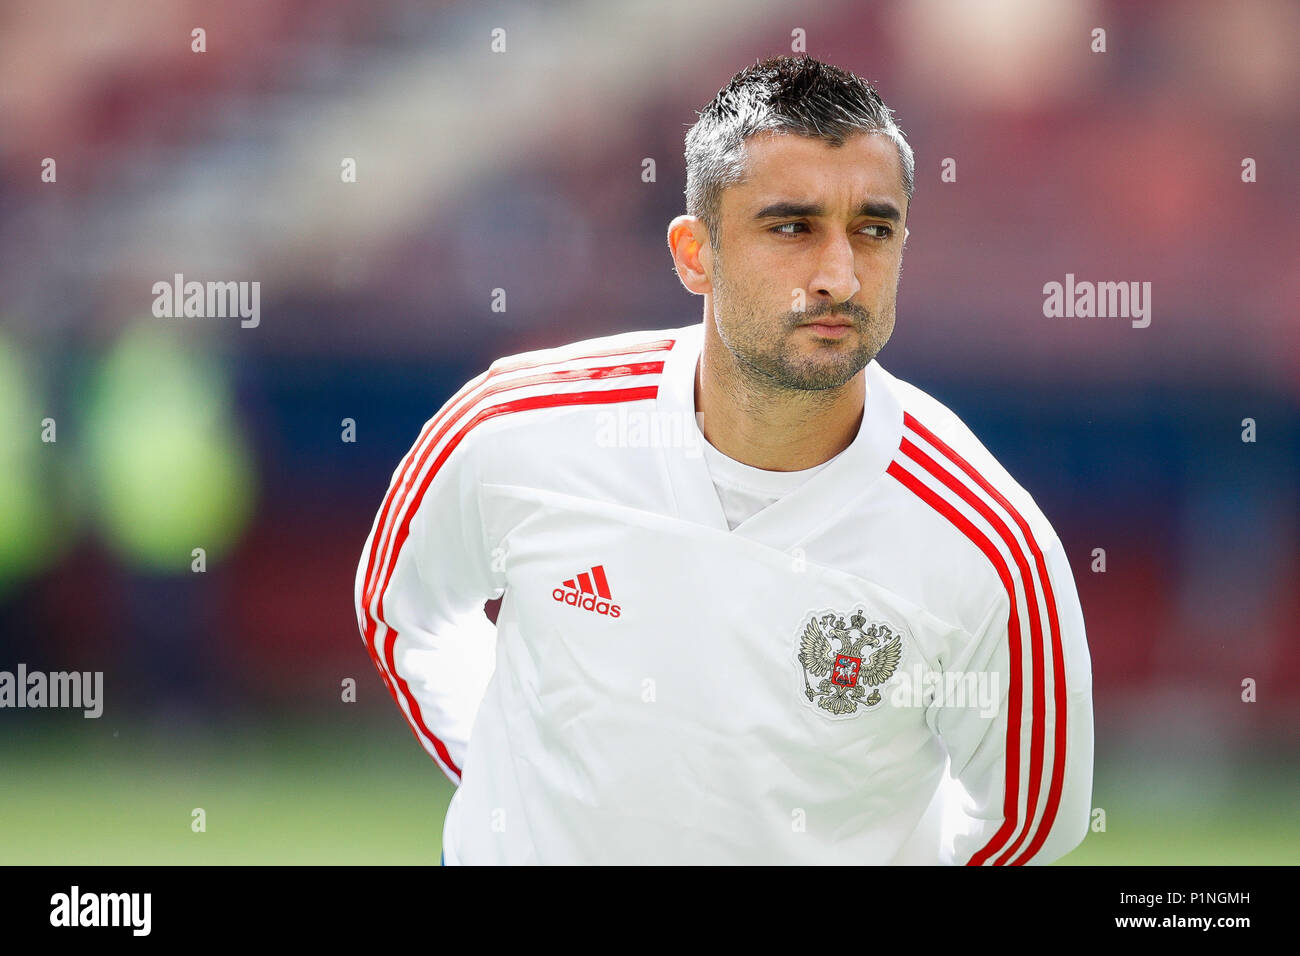 MOSCOU, MO - 13.06.2018: GENERAL PICTURES MOSCOW 2018 - Aleksandr Samedov of Russia during the official training before the opening game of the 2018 FIFA World Cup between Russia and Saudi Arabia held at the Lujniki Stadium in Moscow, Russia. (Photo: Marcelo Machado de Melo/Fotoarena) Stock Photo